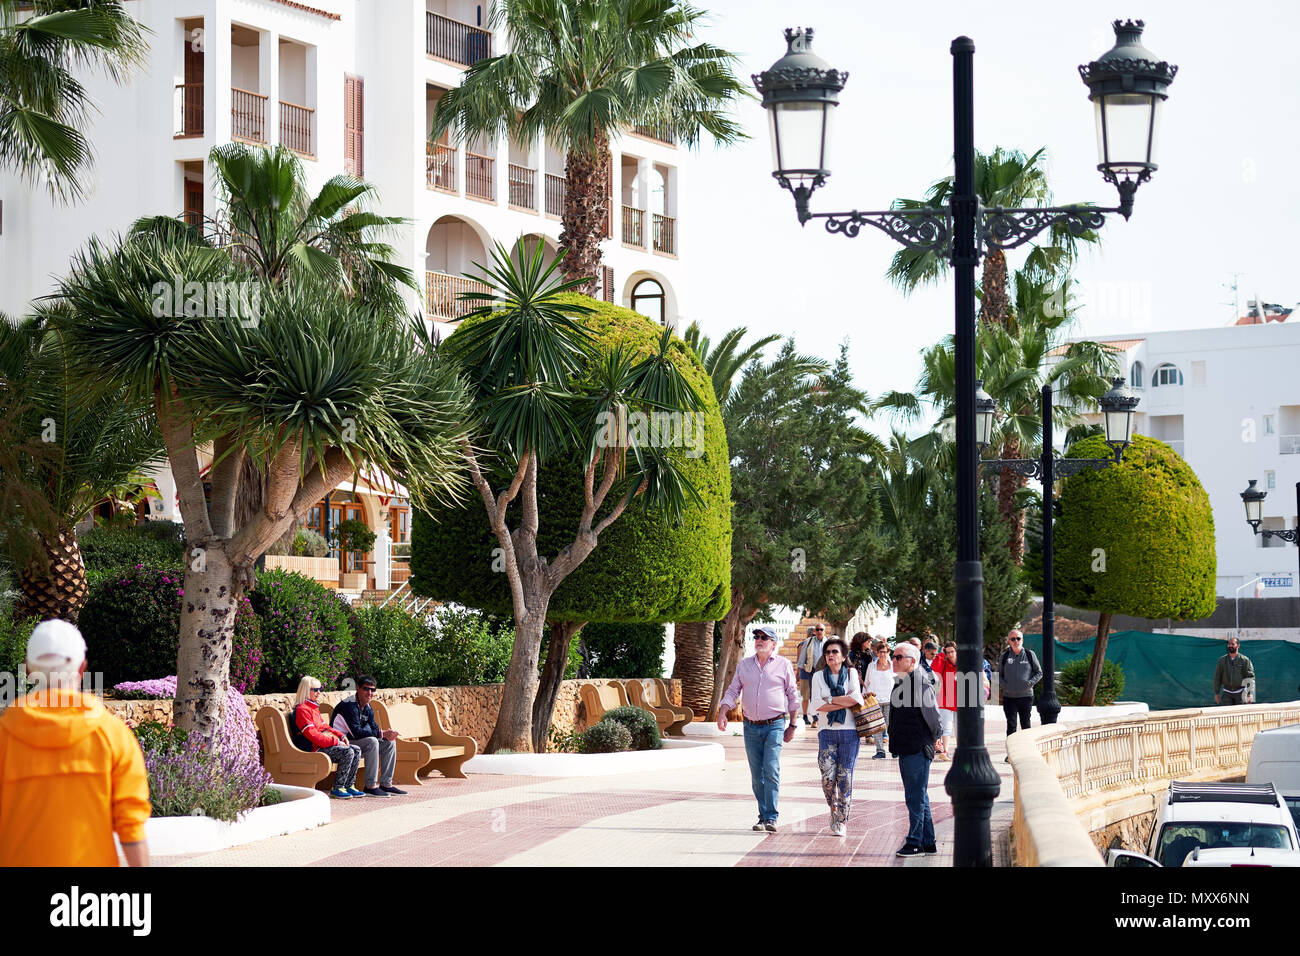 Ibiza Island, Spain - April 30, 2018: People walking by the seafront of Santa Eulalia. Santa Eulalia is a beautiful town and resort on the East coast  Stock Photo